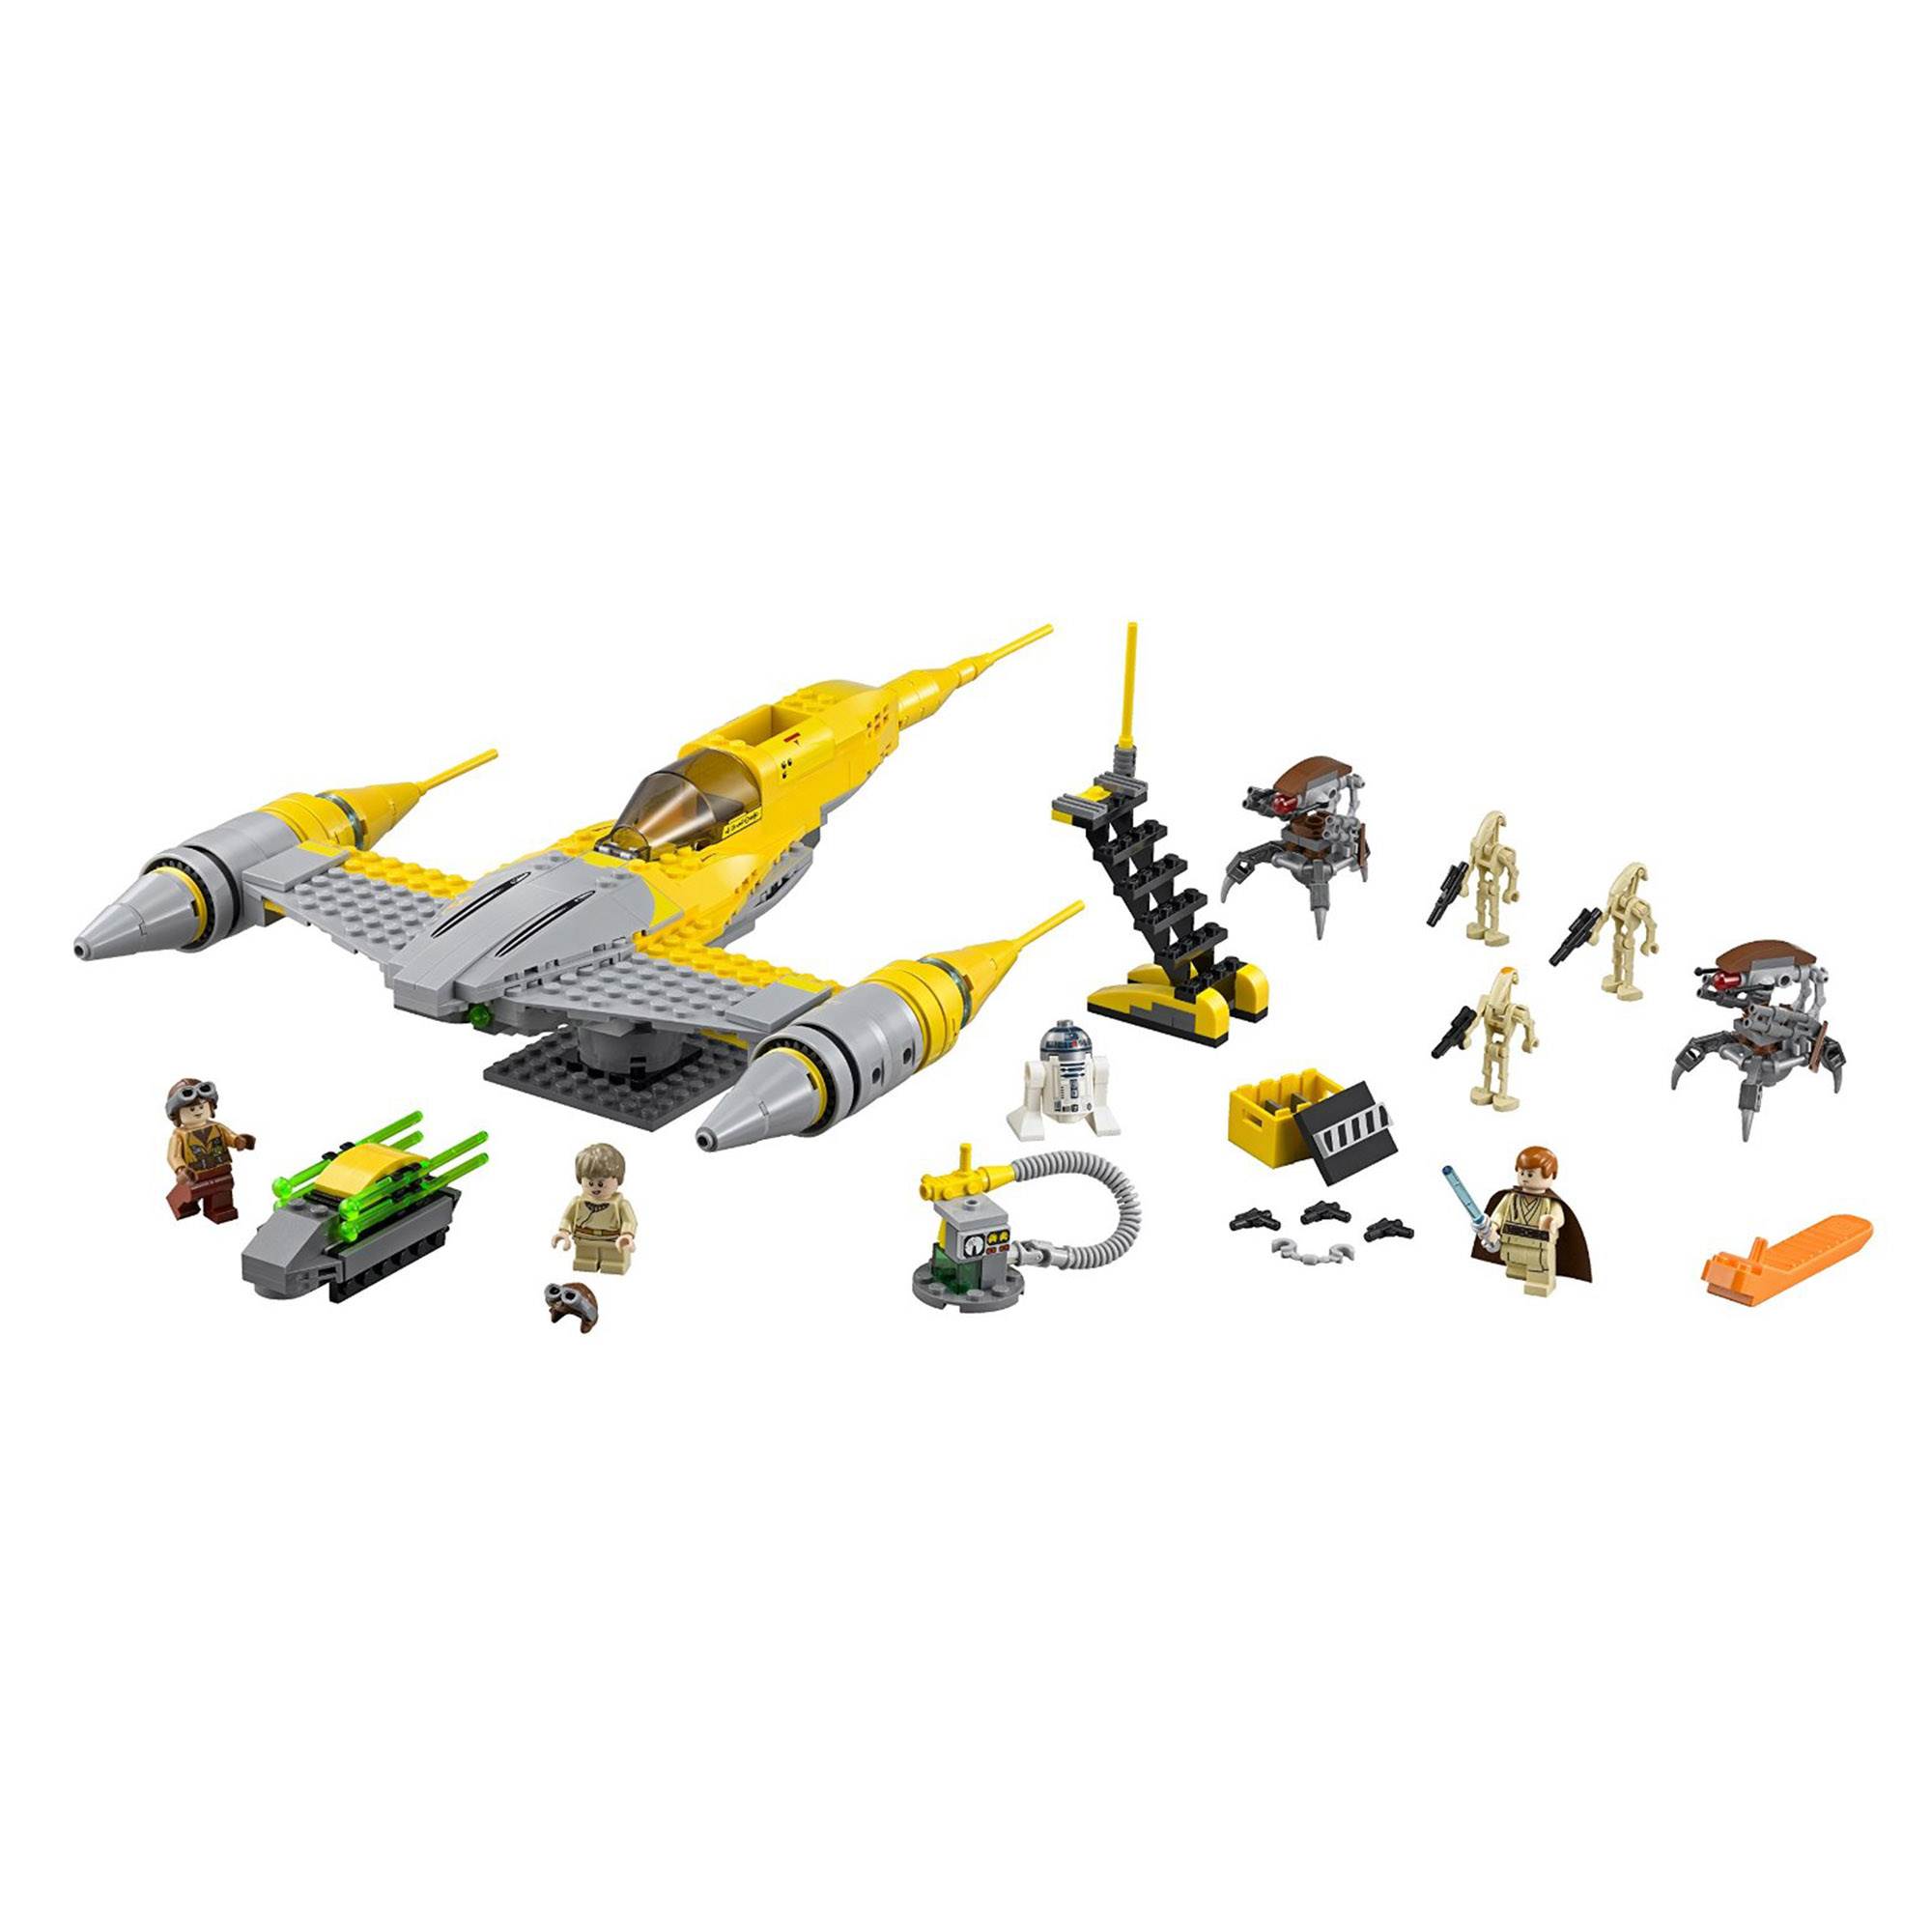 LEGO Star Wars Naboo Starfighter 75092 Building Kit - image 1 of 7